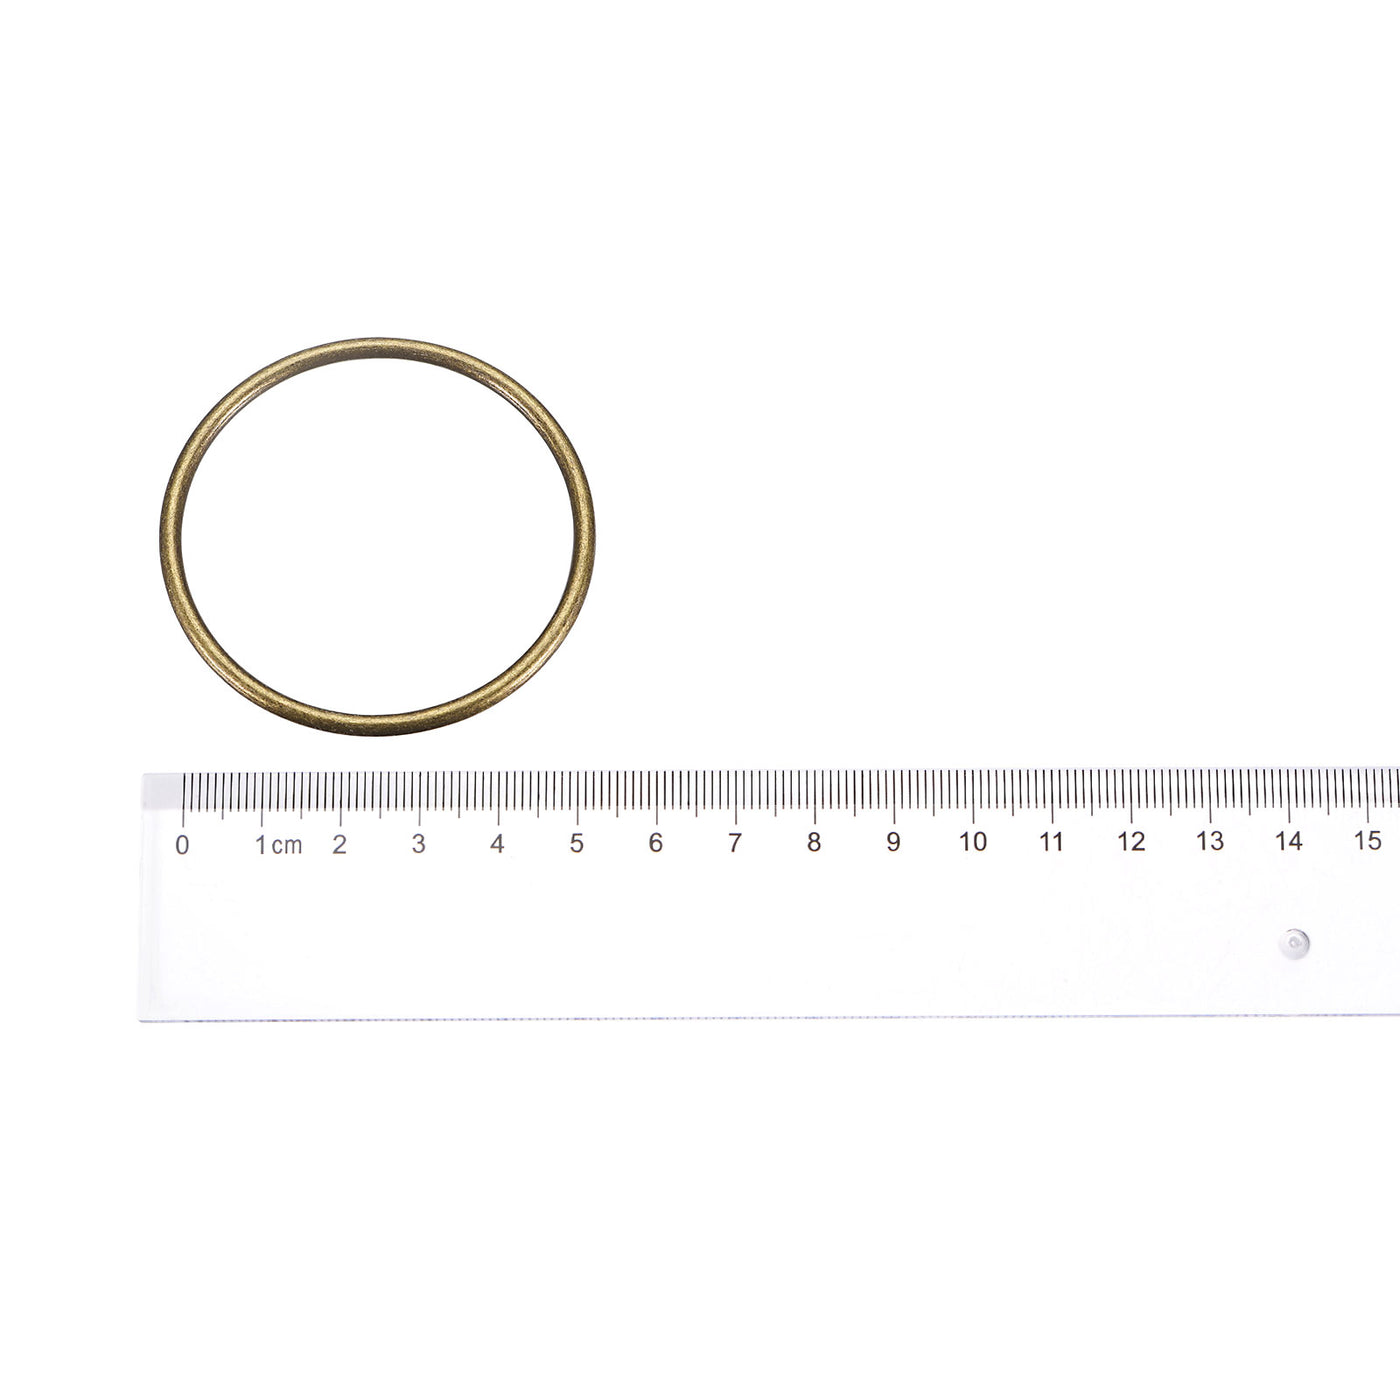 uxcell Uxcell Metal O Rings, 15pcs 50mm(1.97") ID 3mm Thick Welded O-Ringe, Bronze Tone